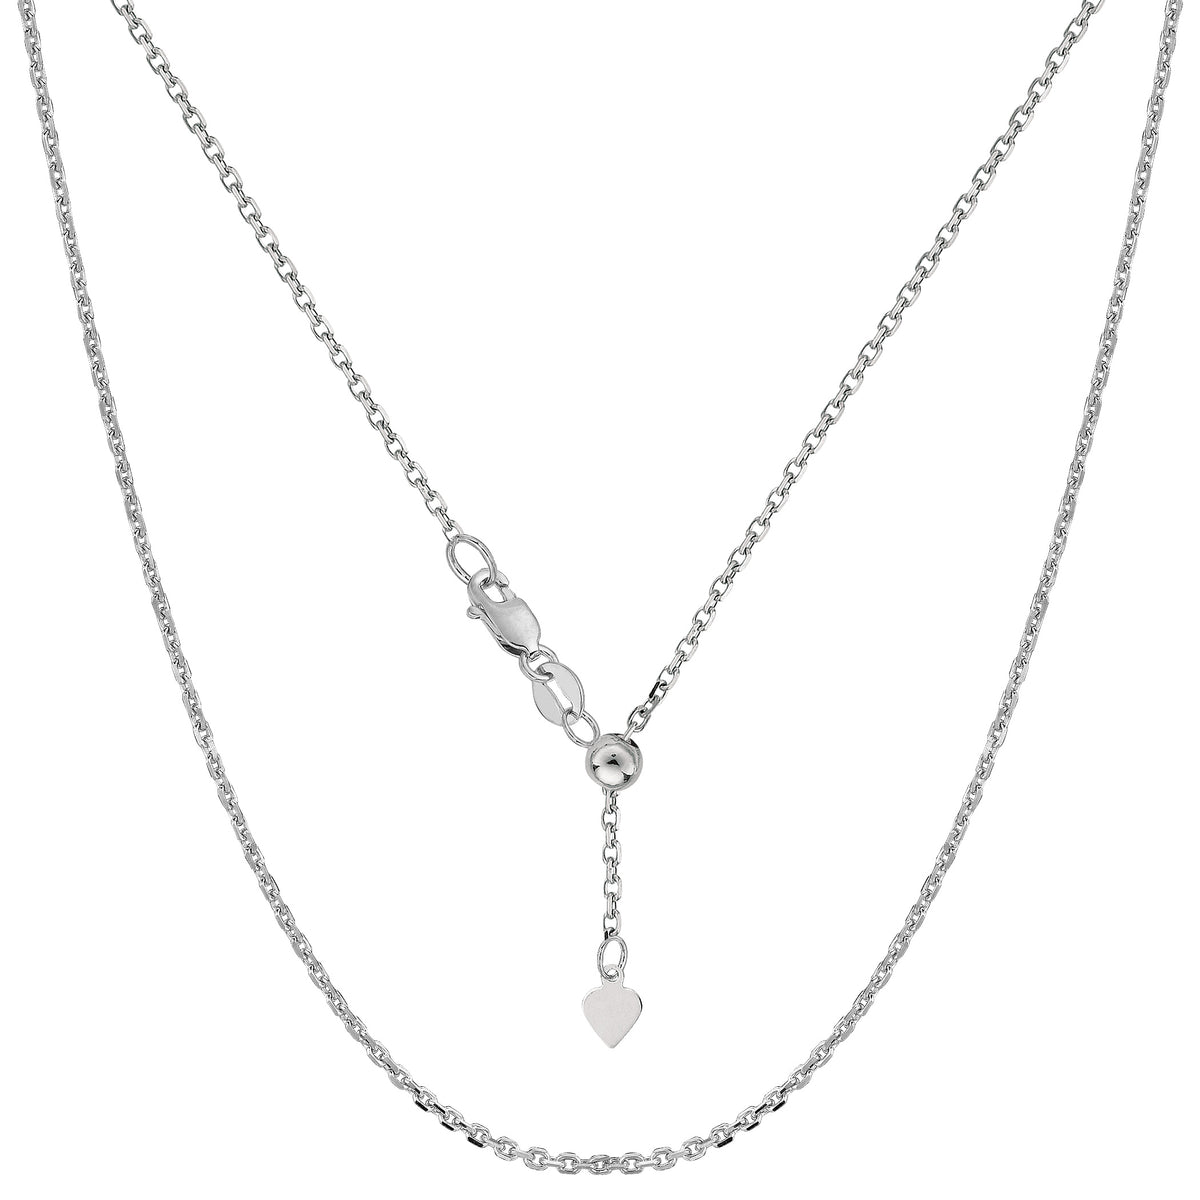 14k White Gold Adjustable Cable Link Chain Necklace, 0.9mm, 22"